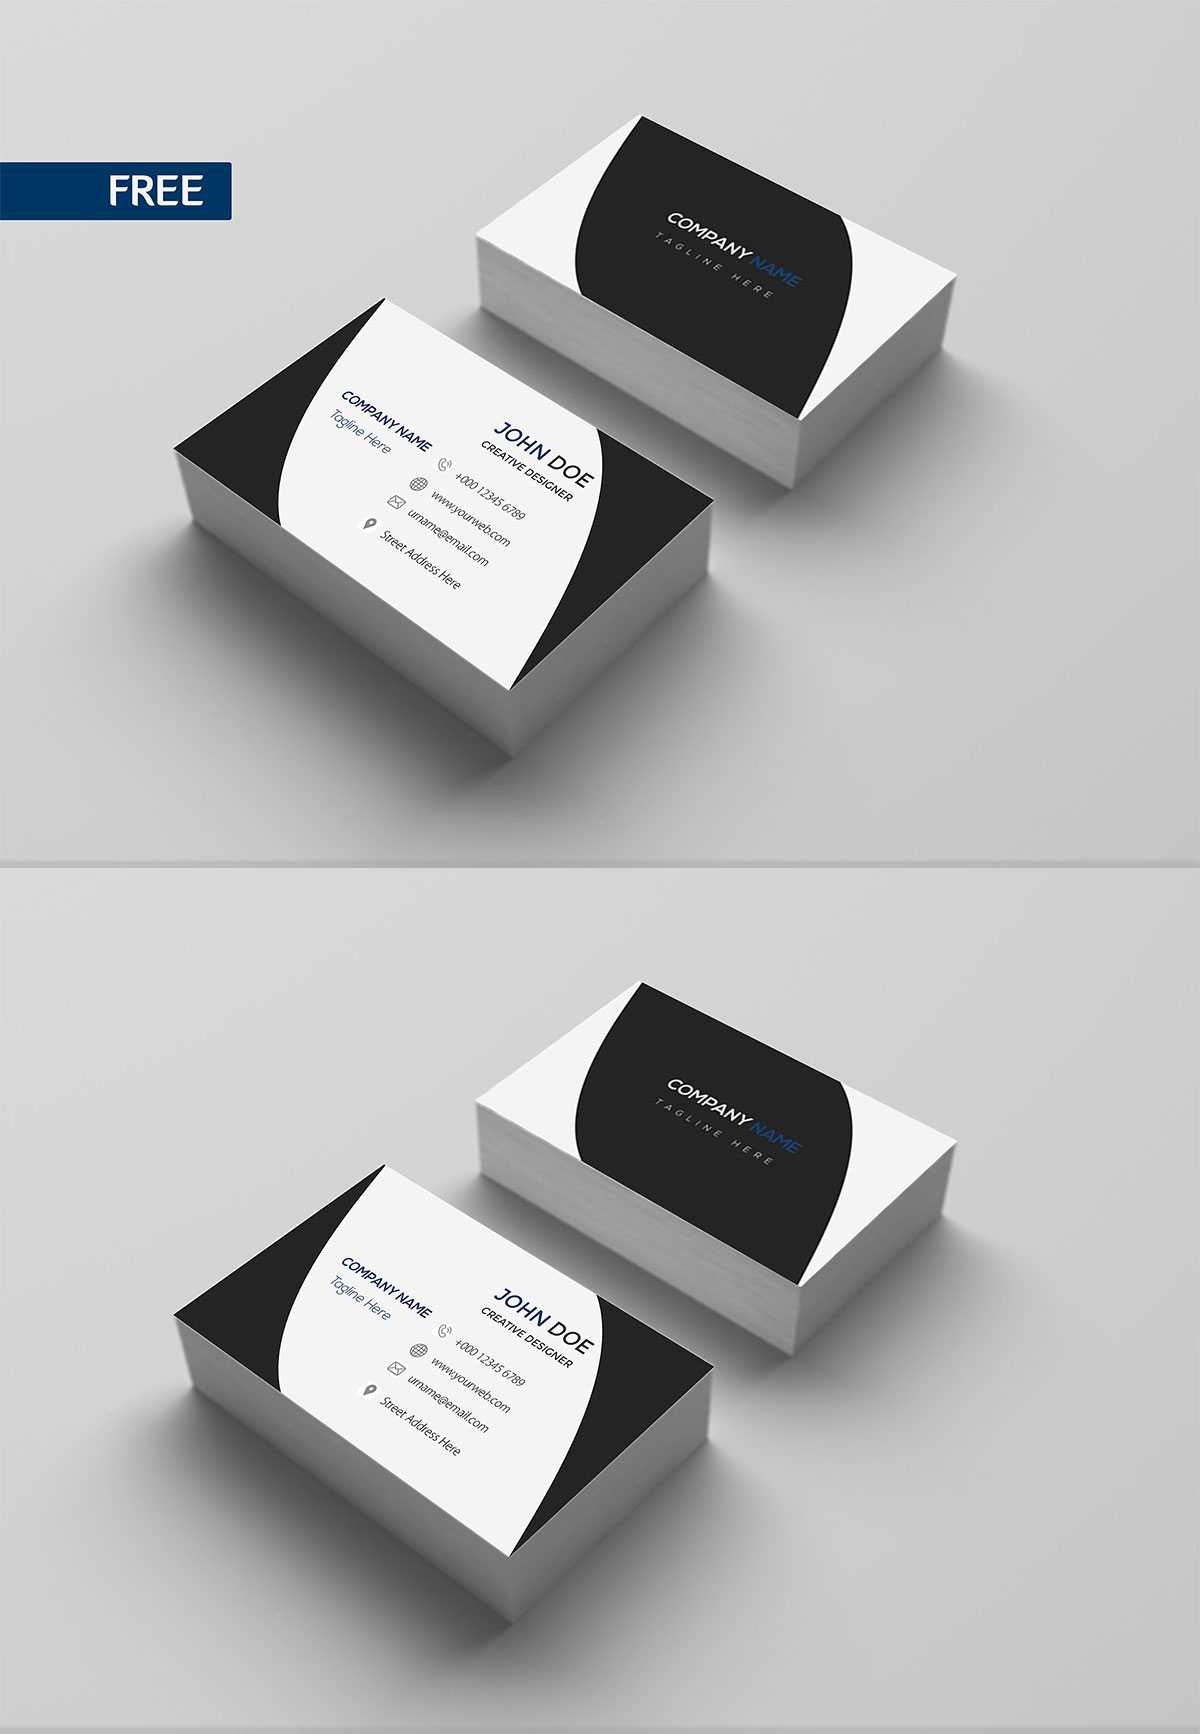 Free Print Design Business Card Template – Creativetacos In Template For Cards To Print Free